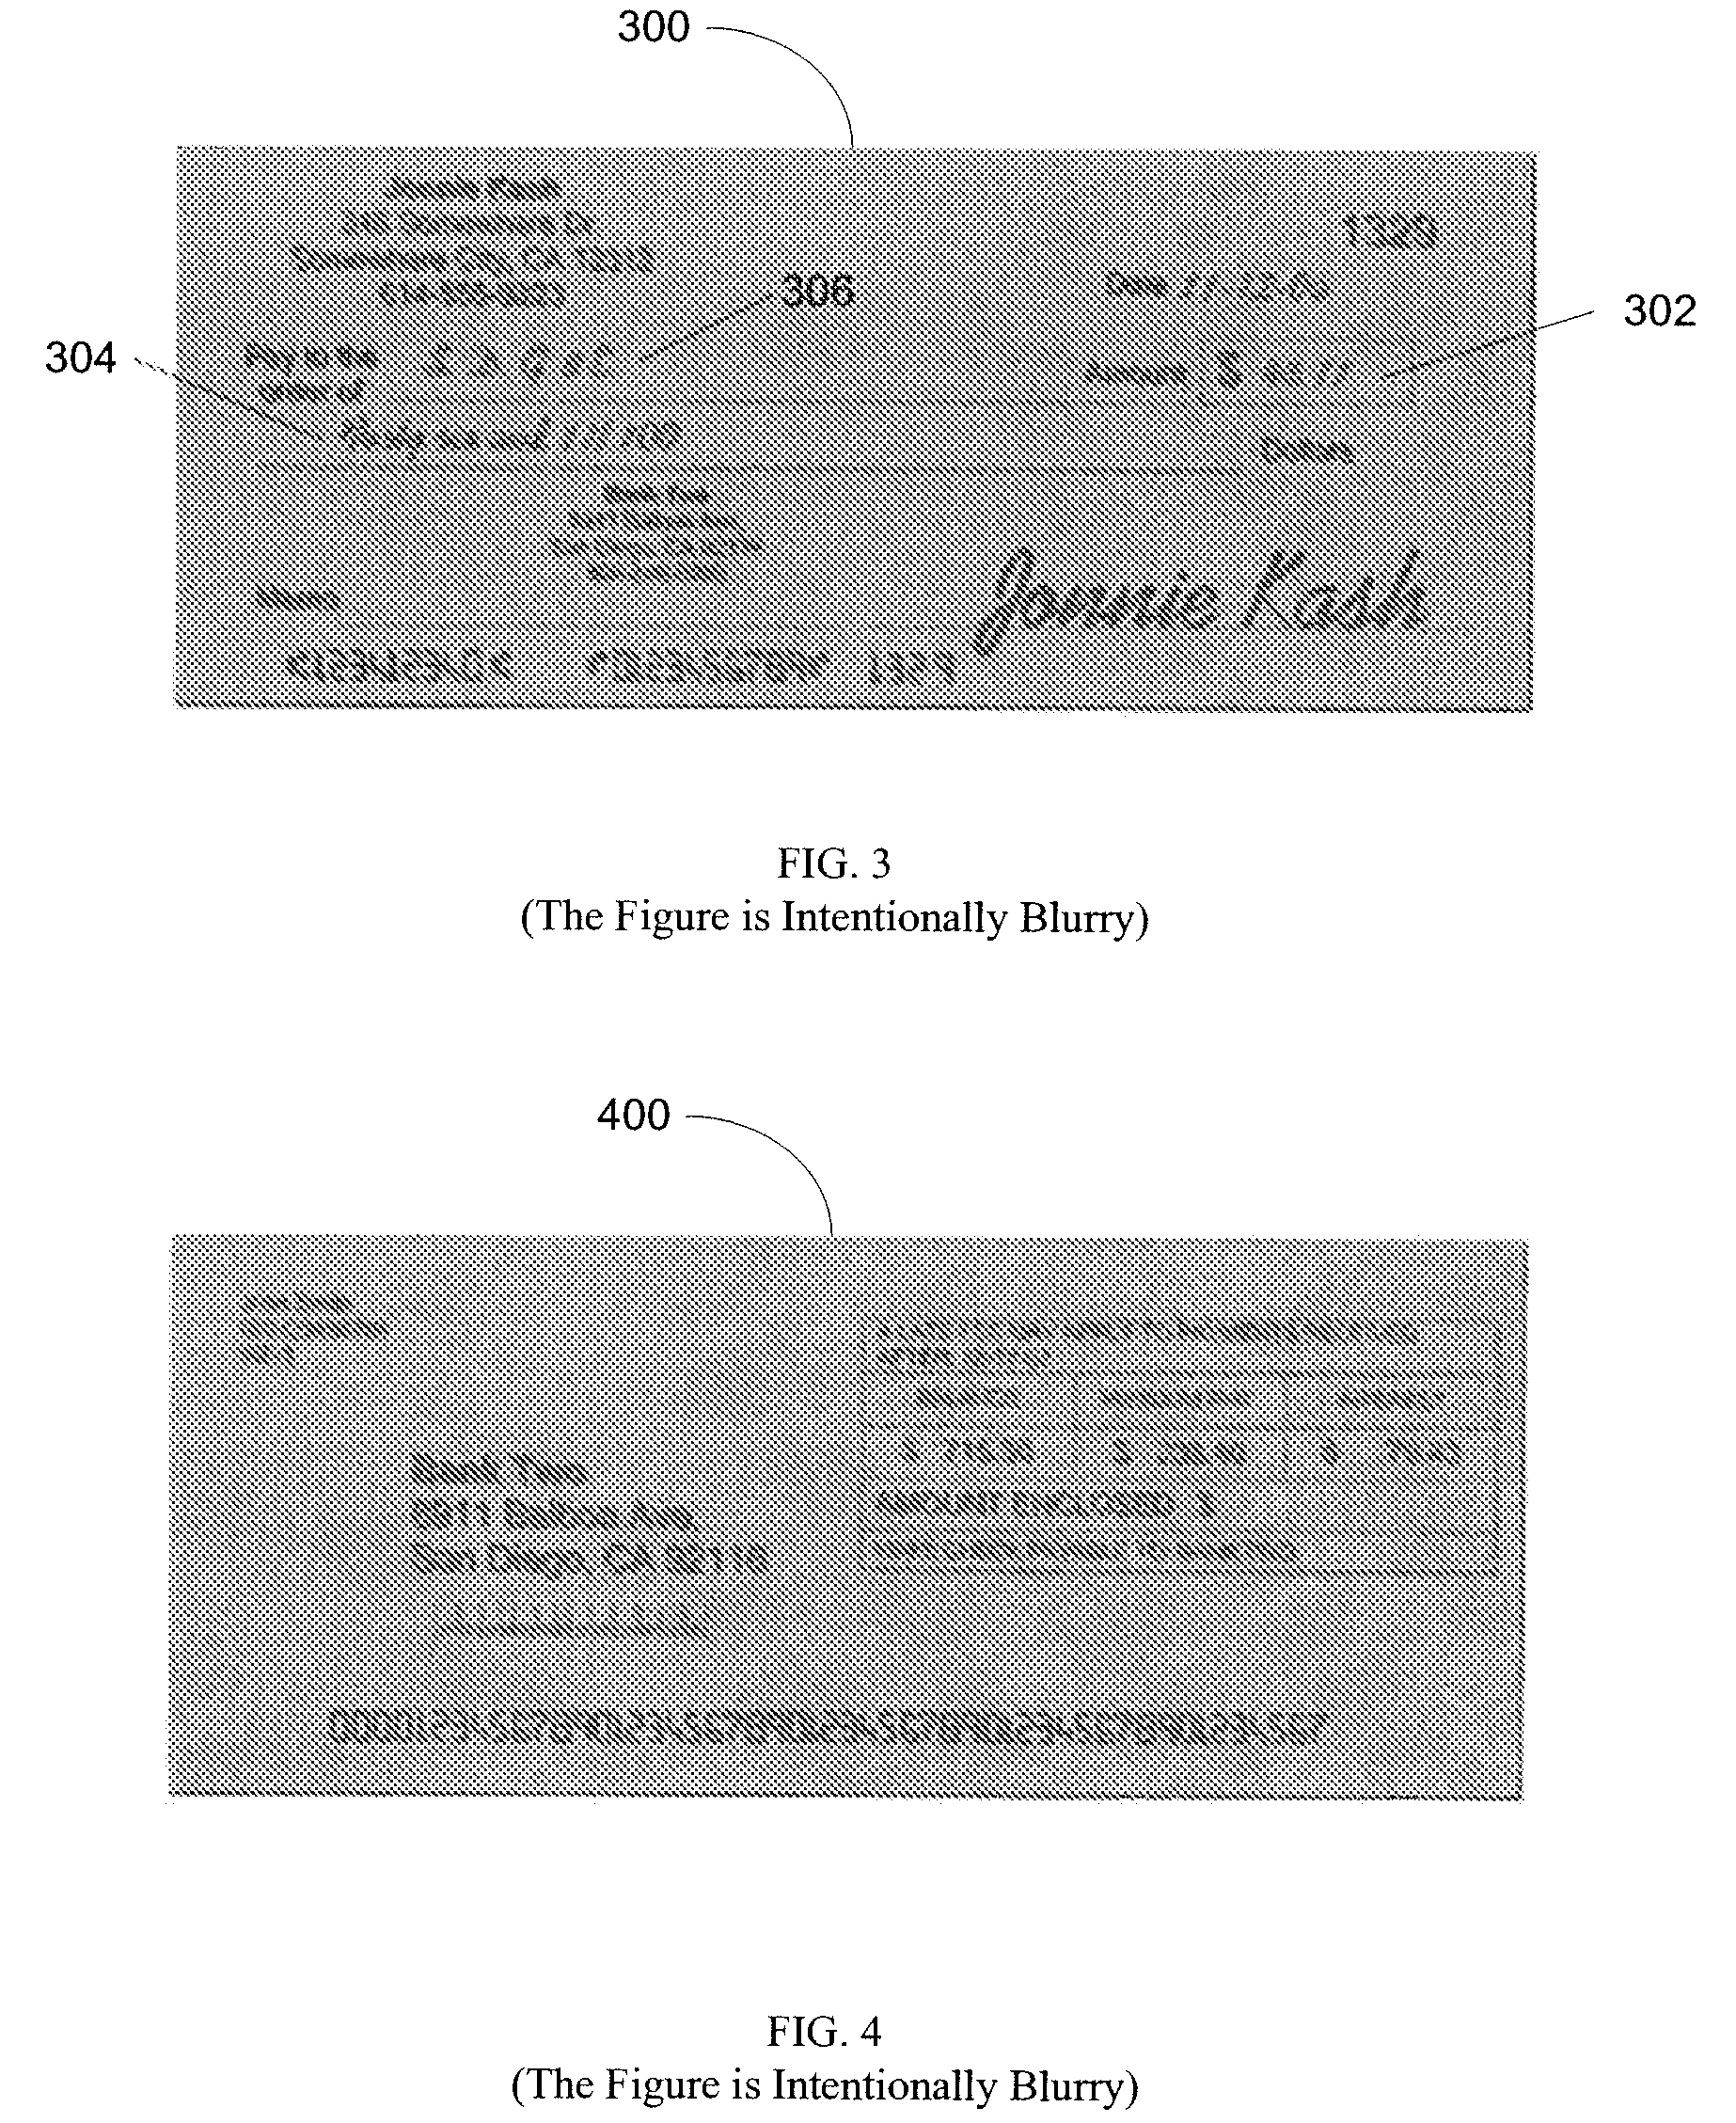 Methods for mobile image capture and processing of checks